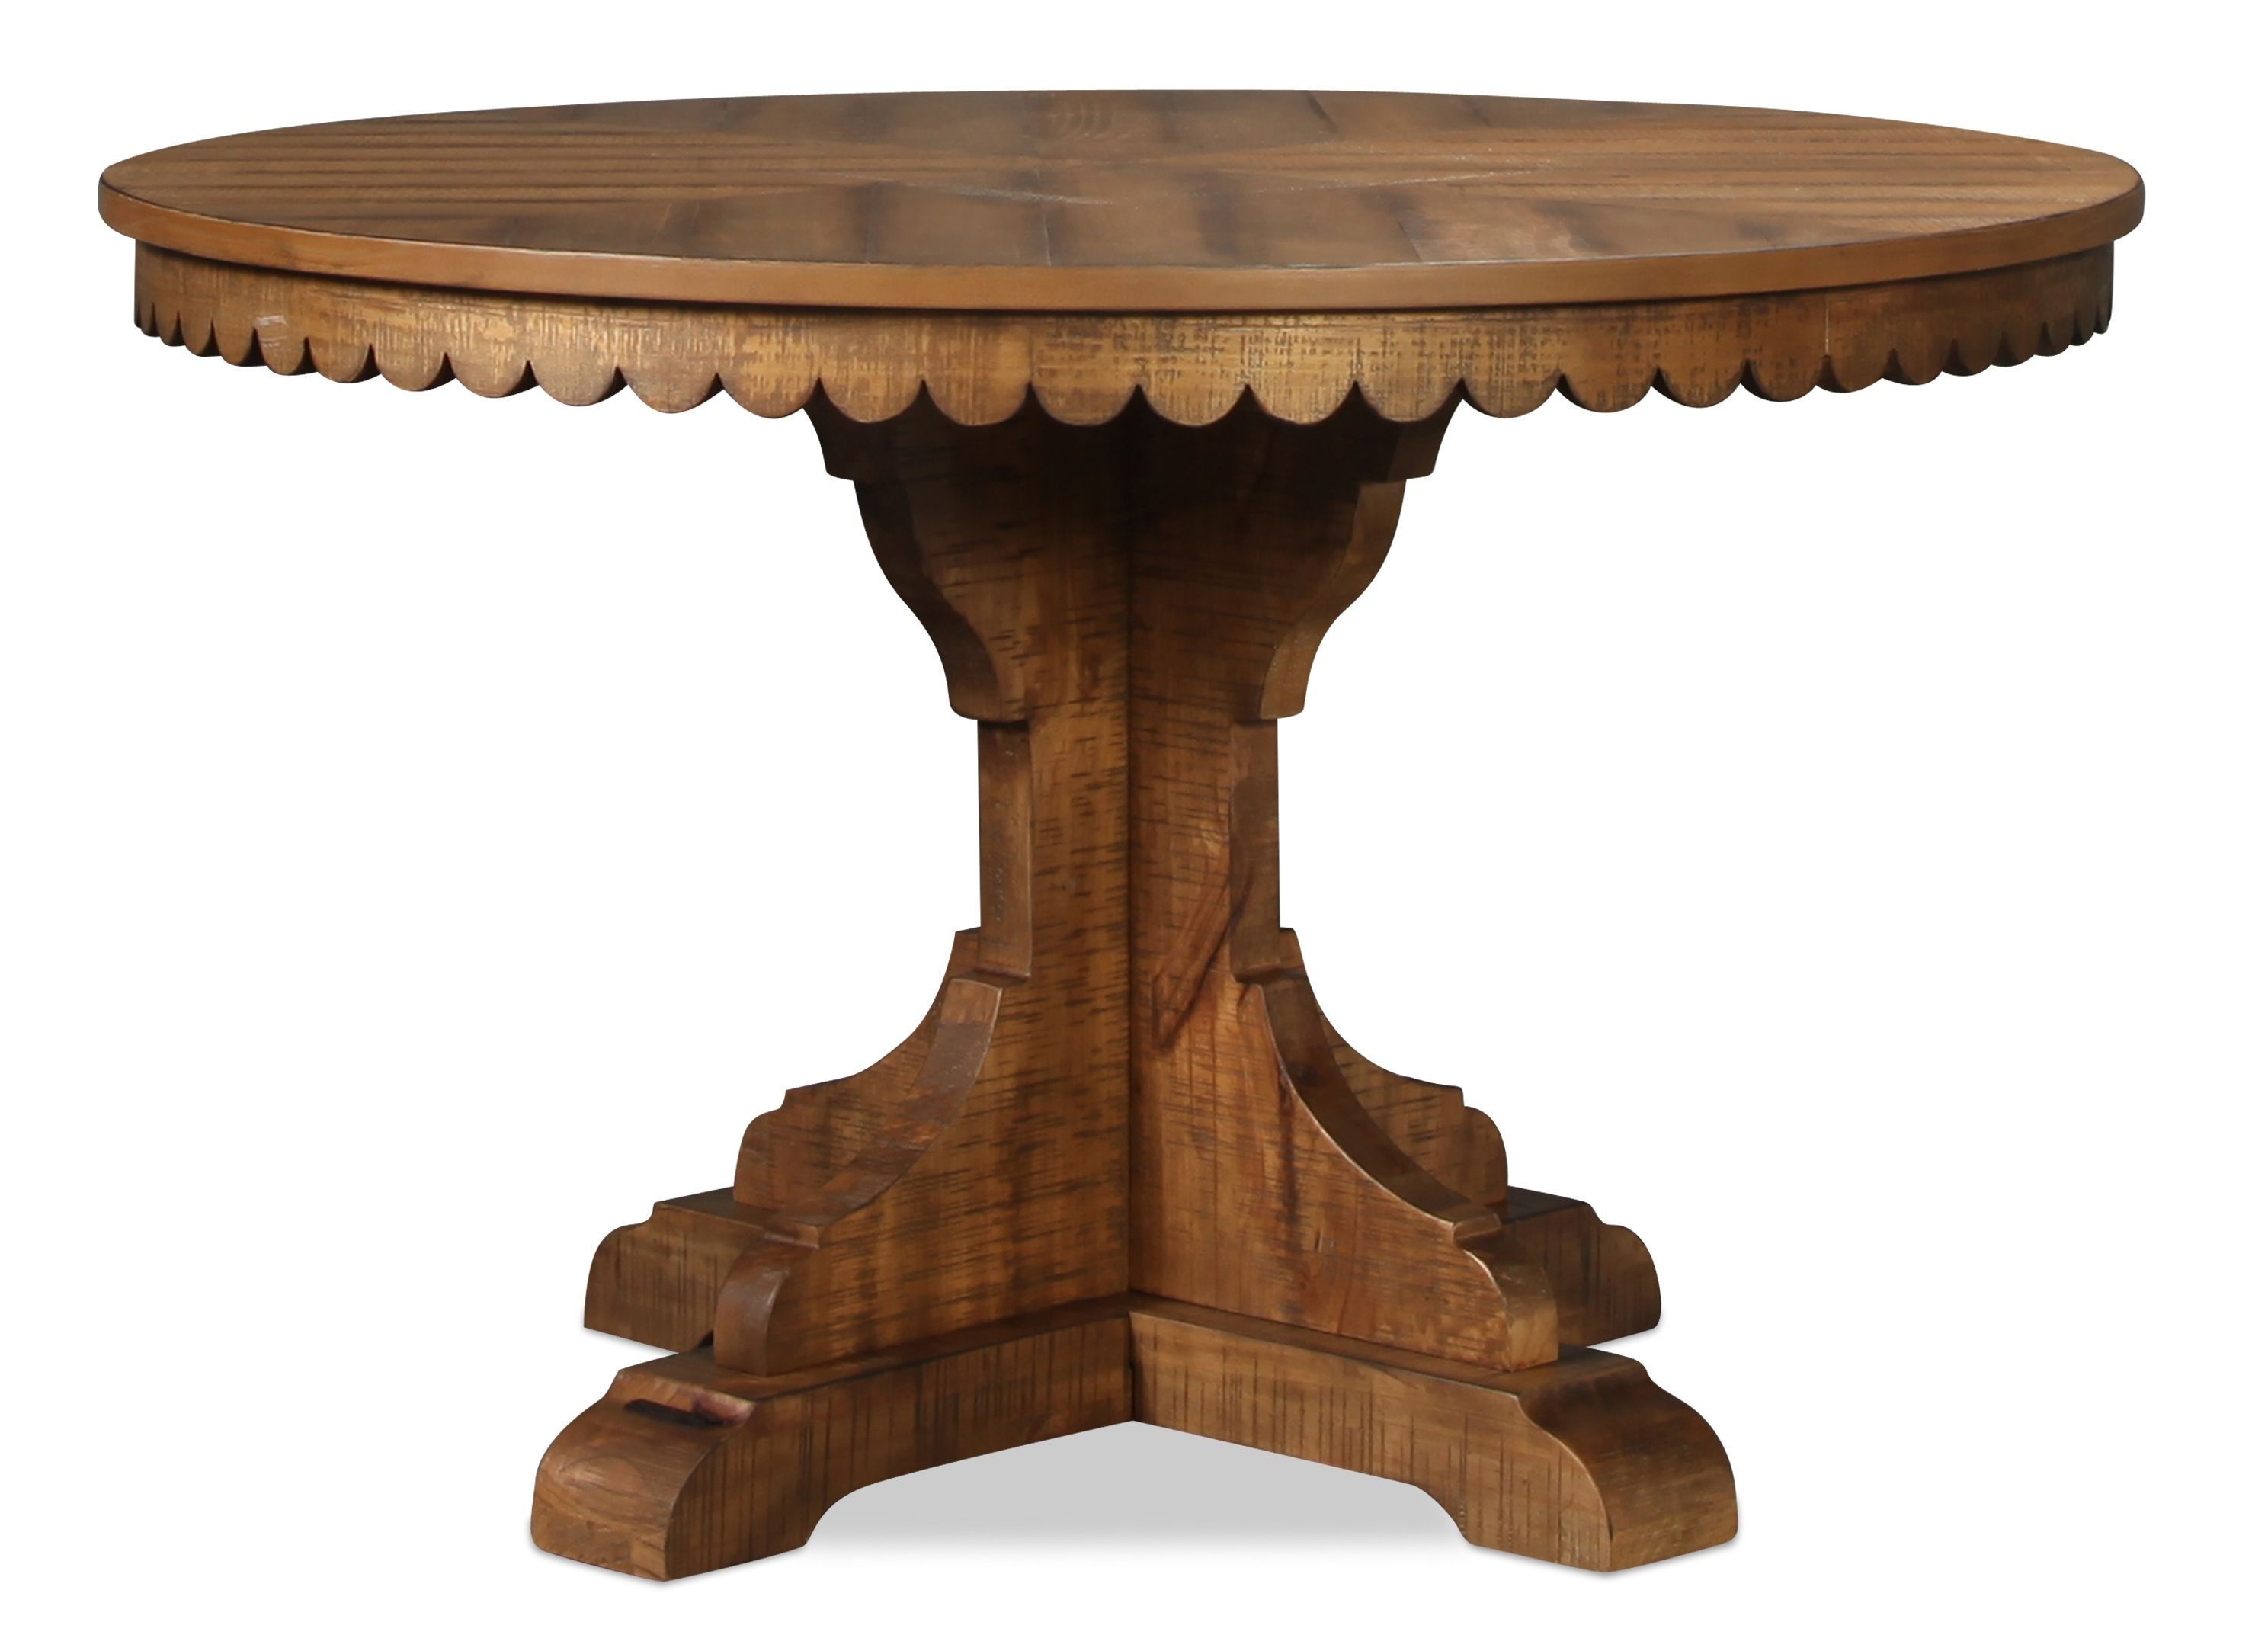 Perfect For Small Space Dining Or As A Breakfast Table, The Magnolia Throughout Latest Magnolia Home Top Tier Round Dining Tables (View 4 of 20)